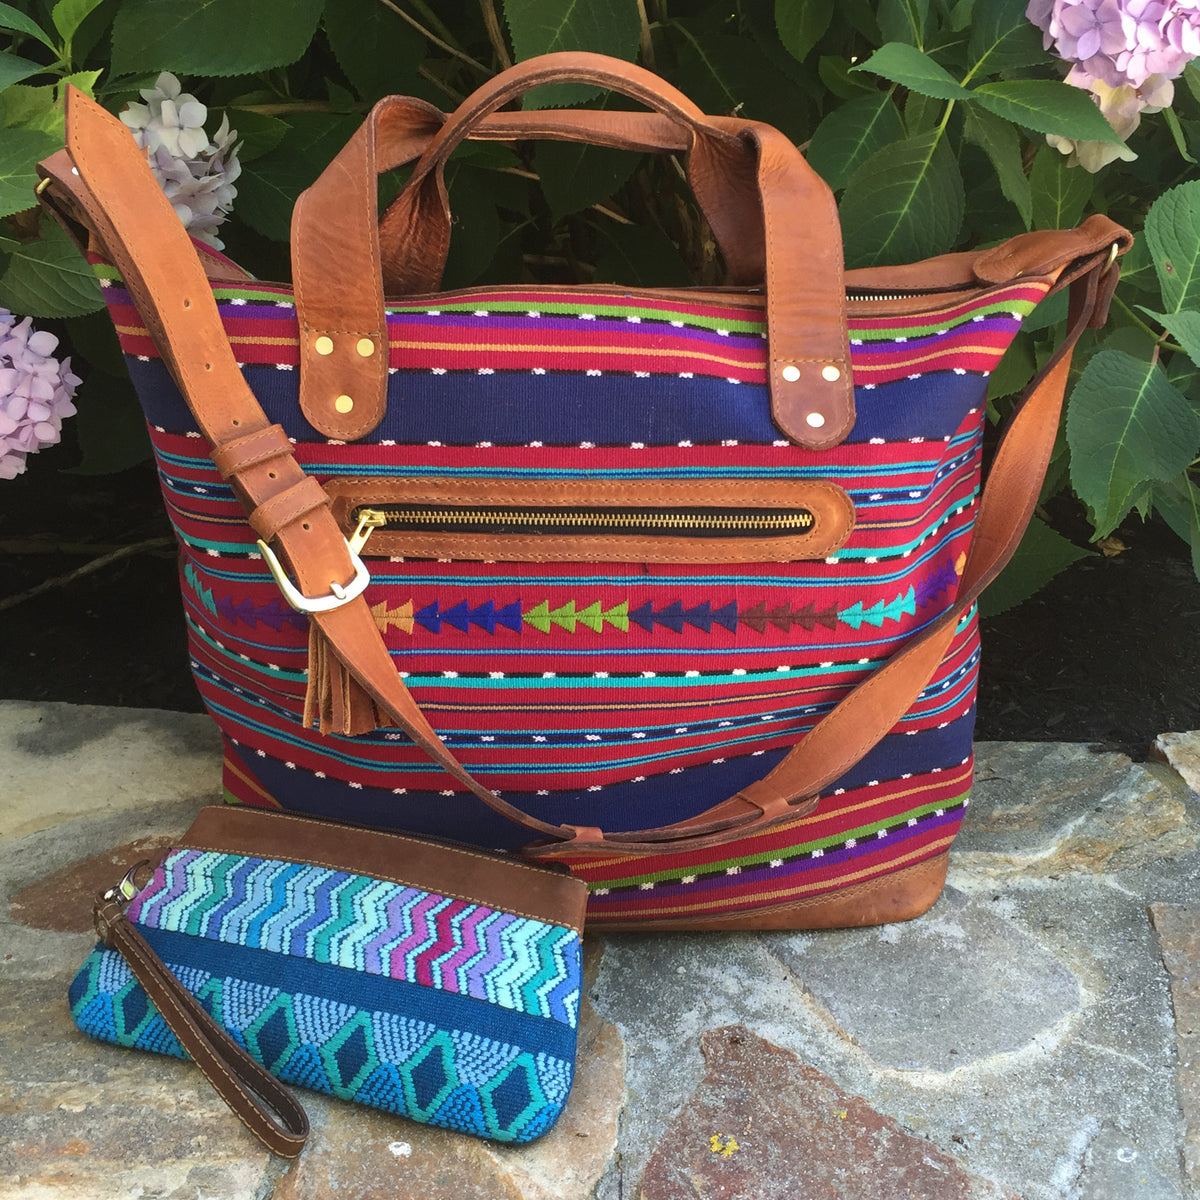 The Weekender Travel Bag with Randa Accent alongside a blue clutch.  Sitting on stone ground in front of a plant.